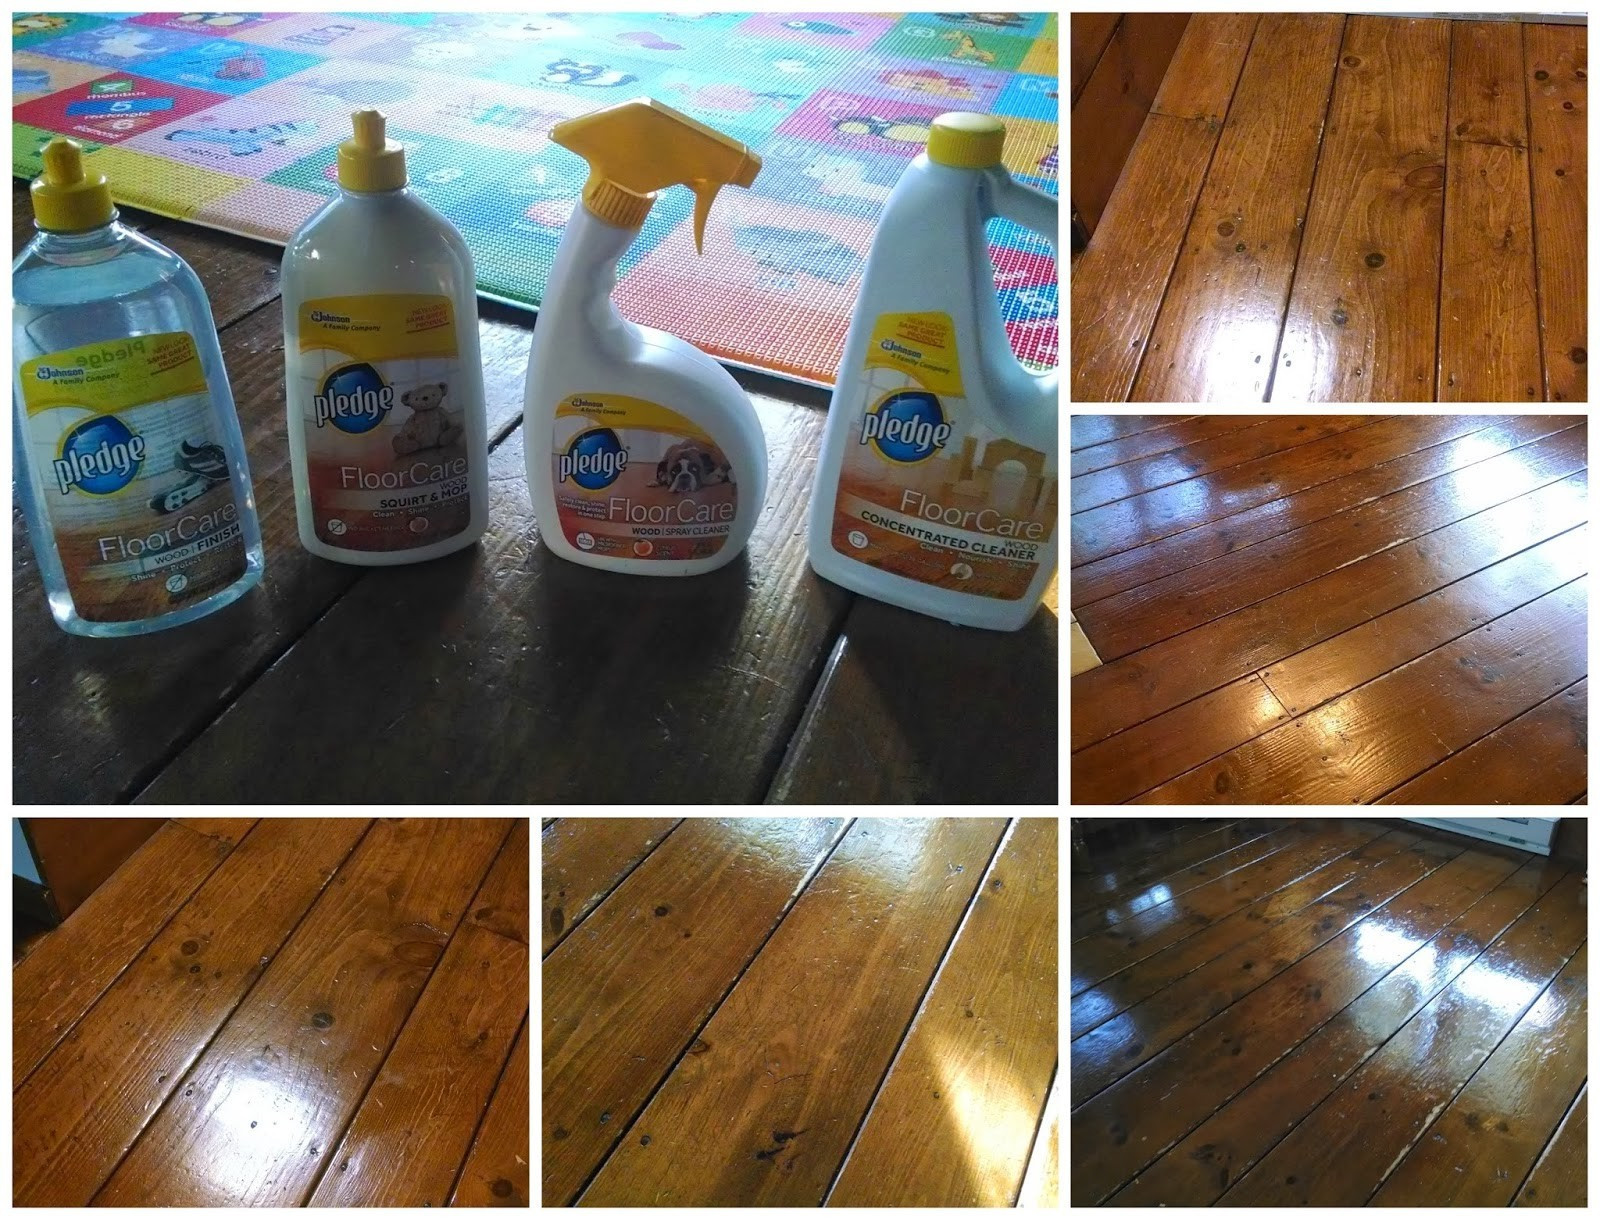 how to use bruce hardwood floor cleaner of 17 awesome what to use to clean hardwood floors image dizpos com throughout what to use to clean hardwood floors fresh 24 best pics best ways to clean hardwood